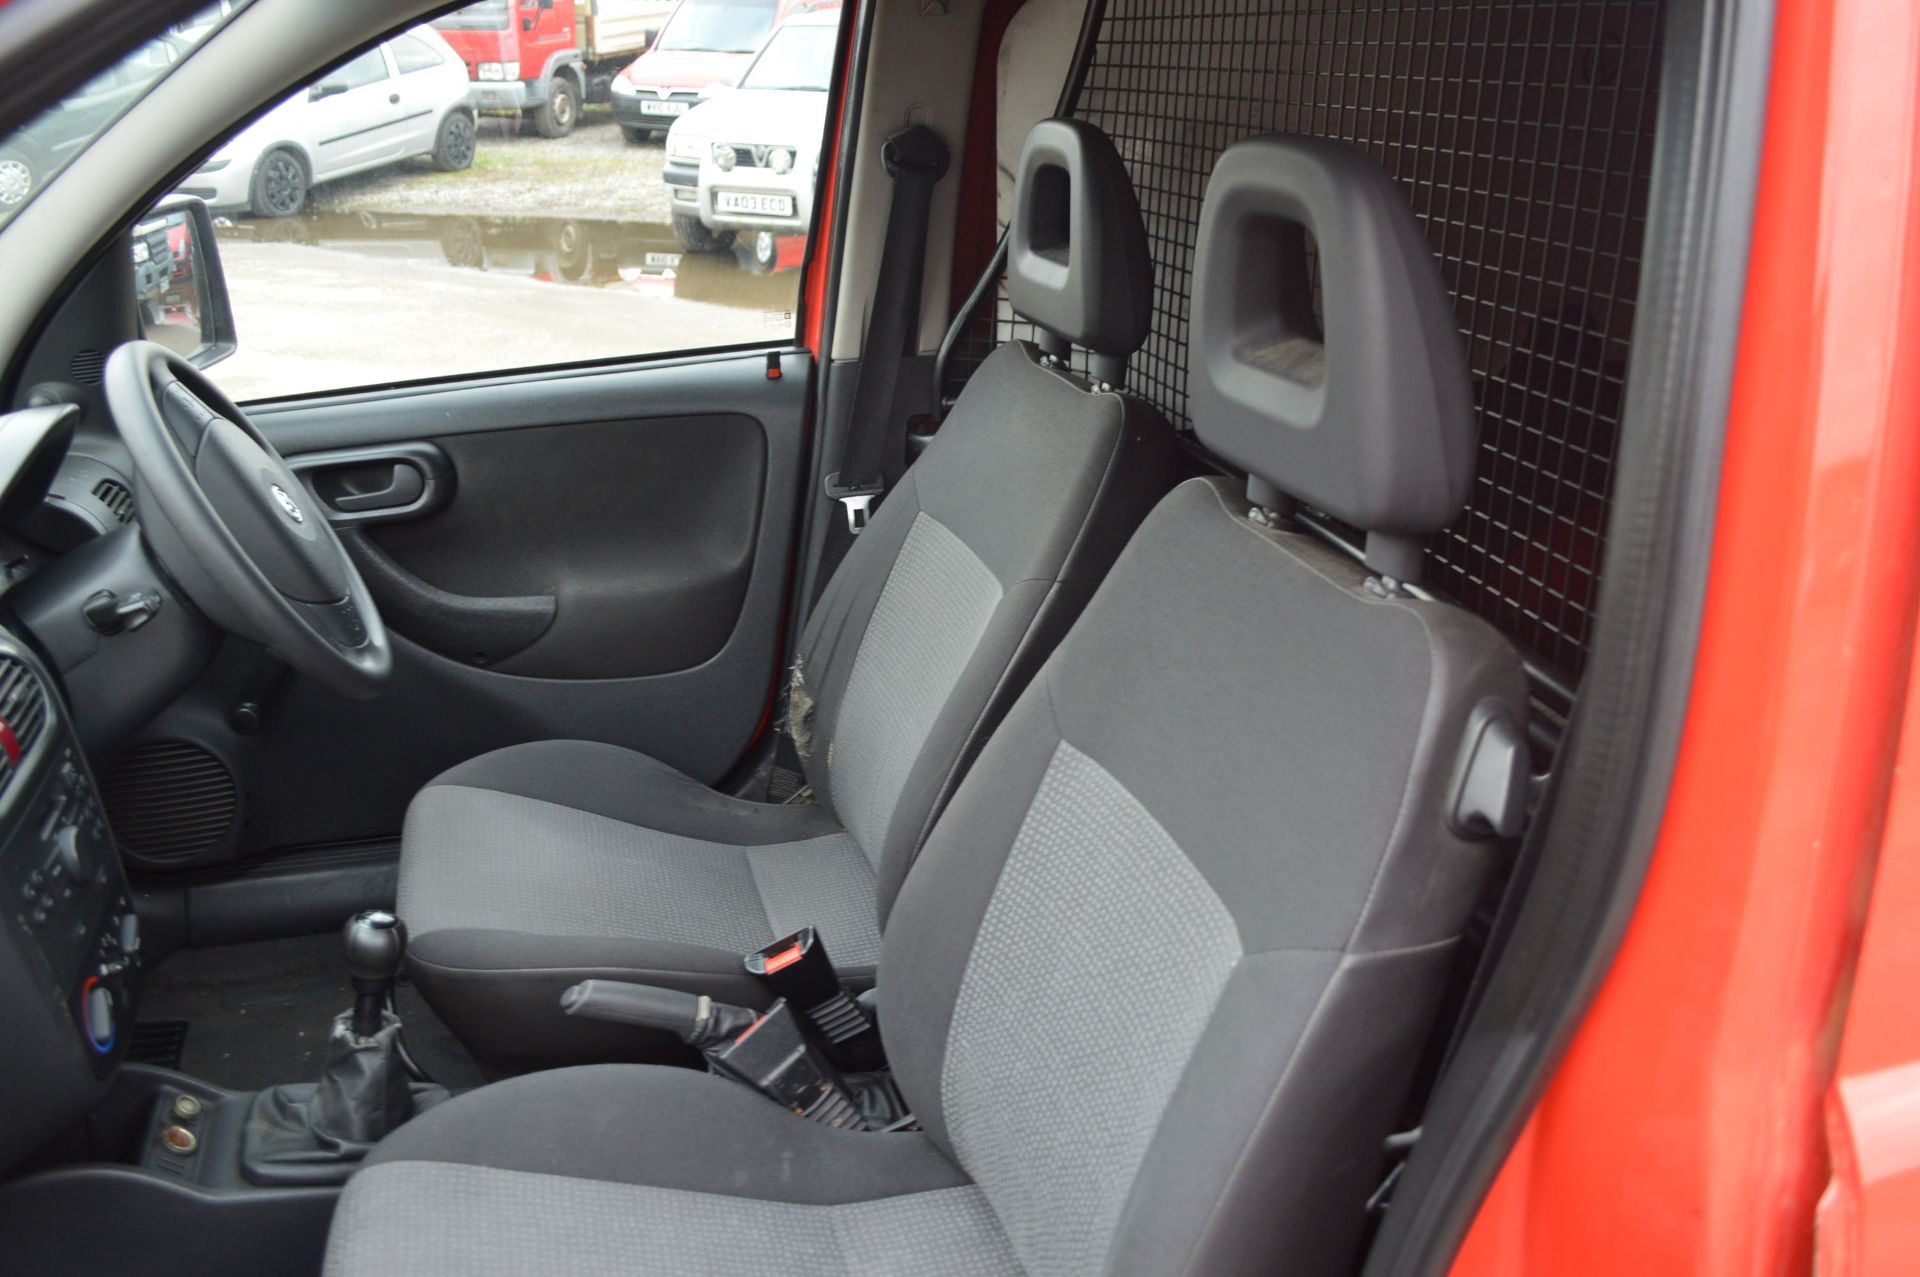 2008/08 REG VAUXHALL COMBO 1700 CDTI, SHOWING 1 OWNER FROM NEW *NO VAT* - Image 10 of 20